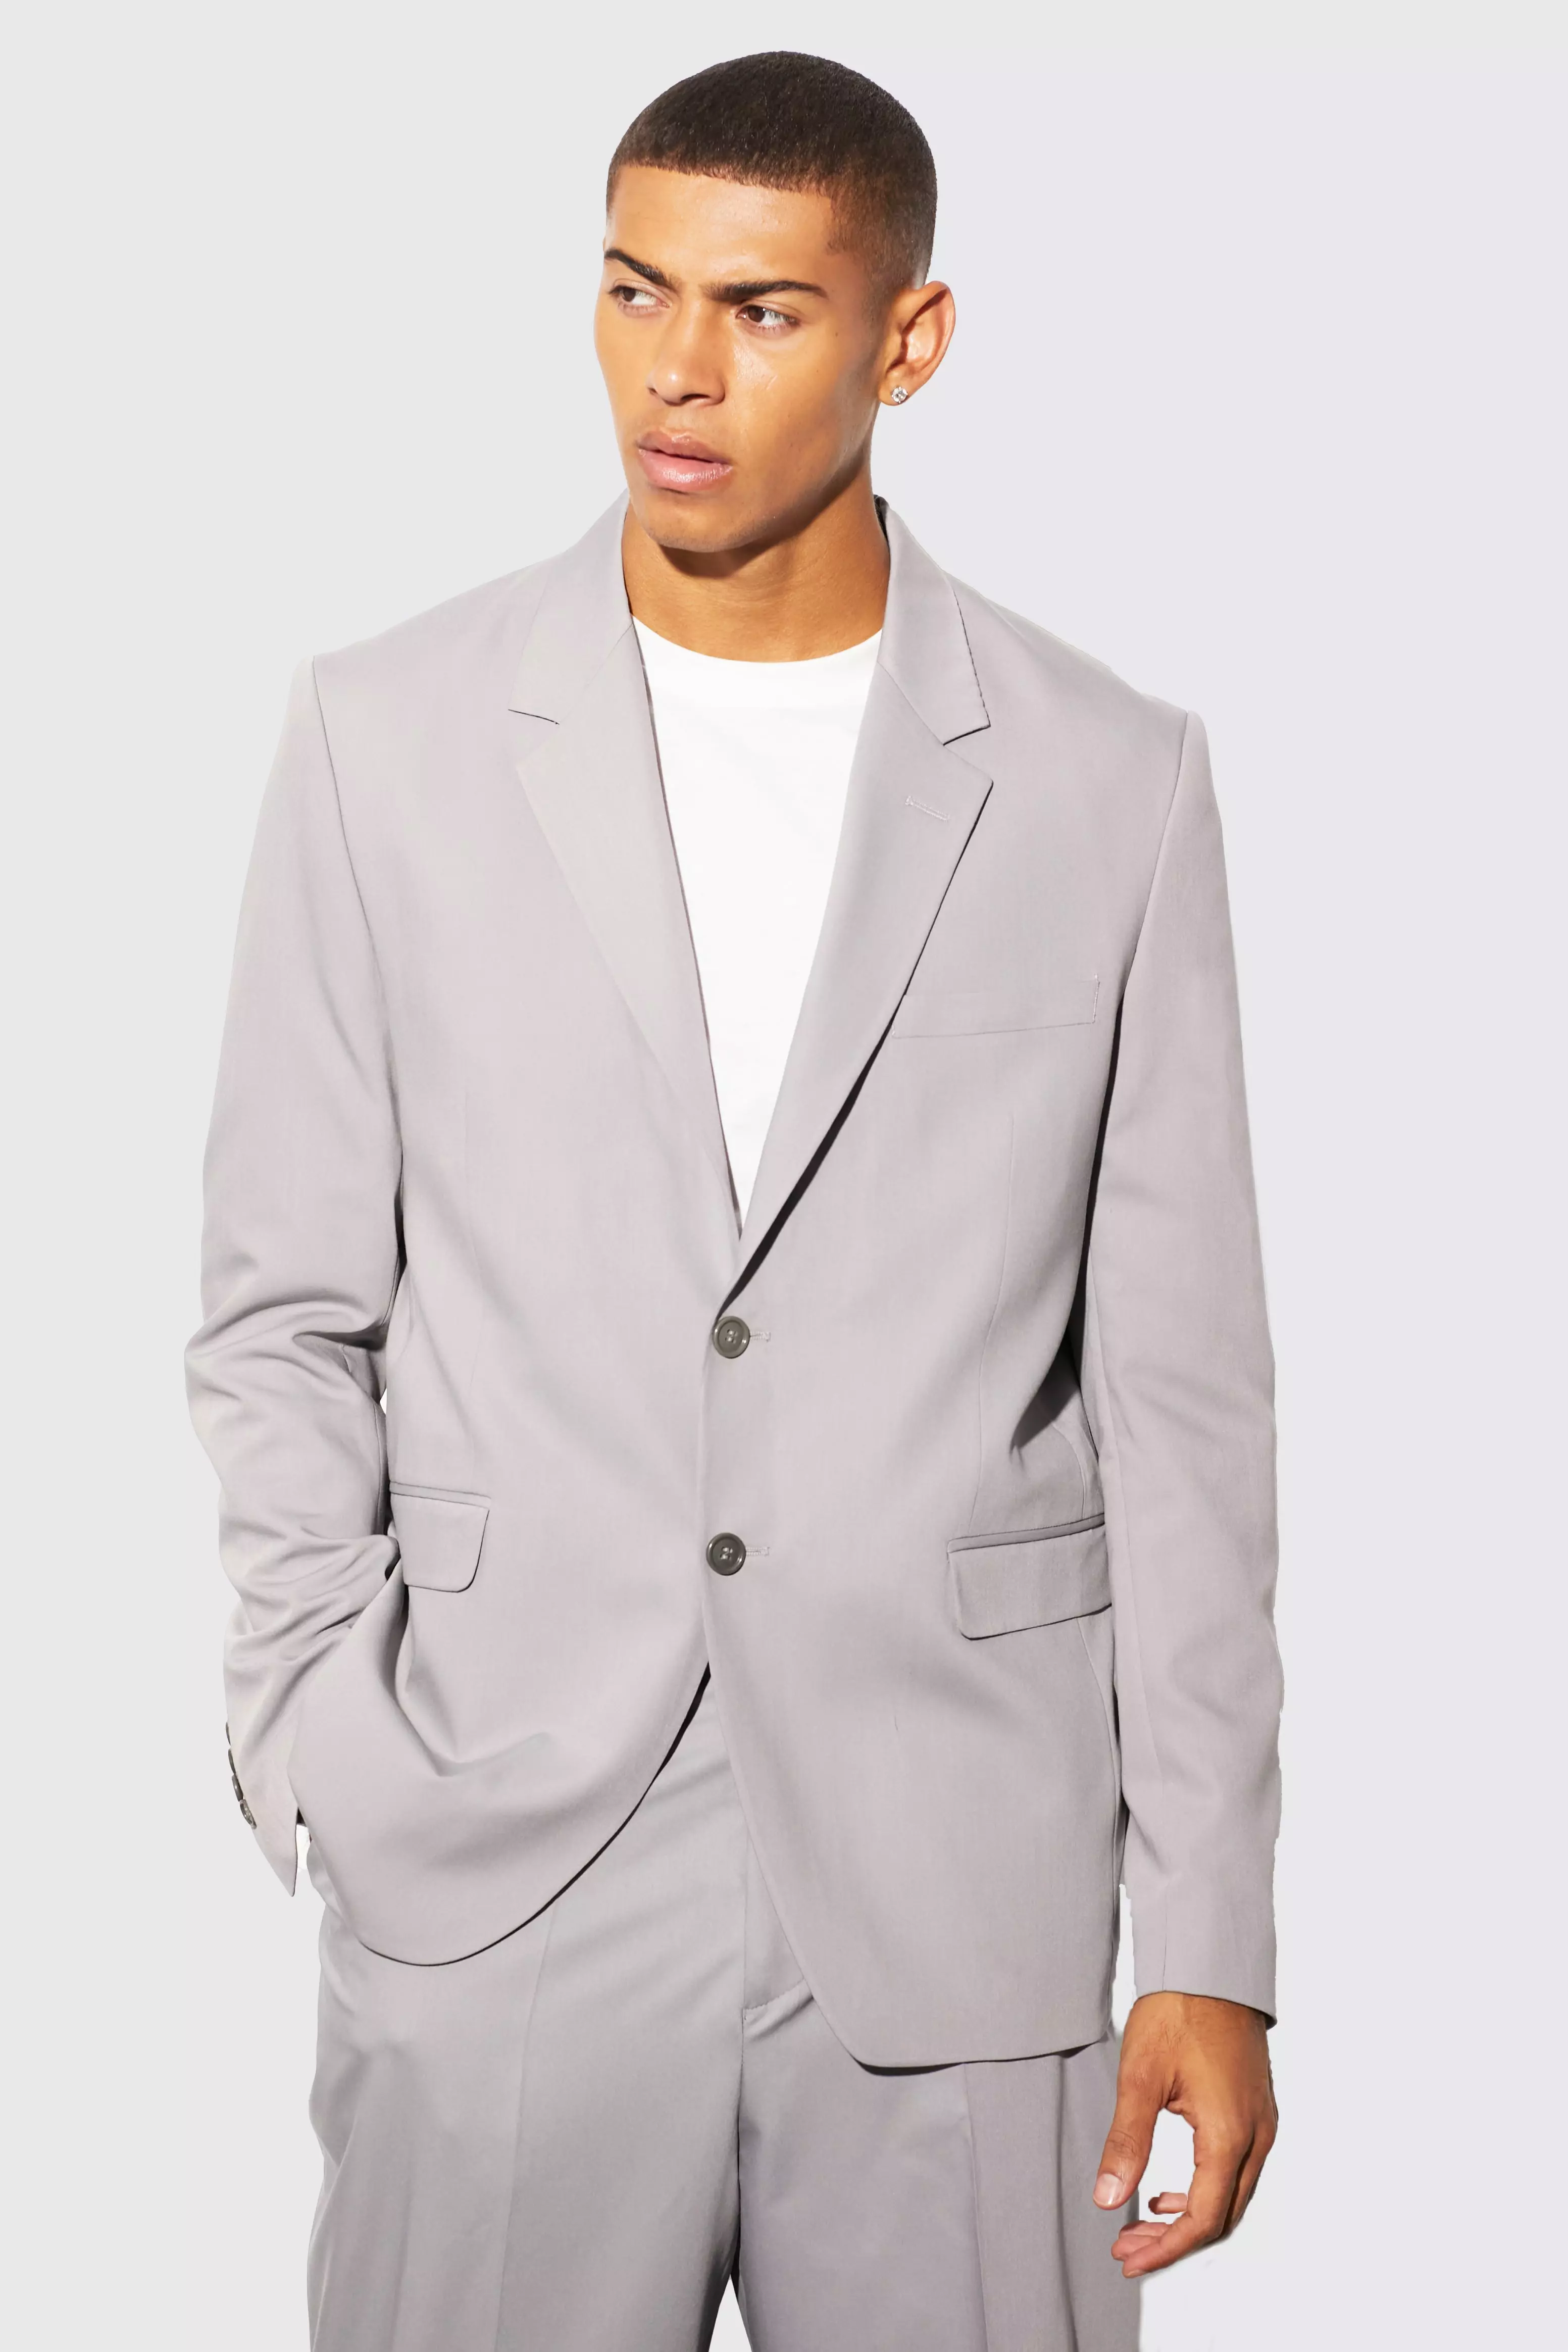 Relaxed Fit Single Breasted Suit Jacket Grey